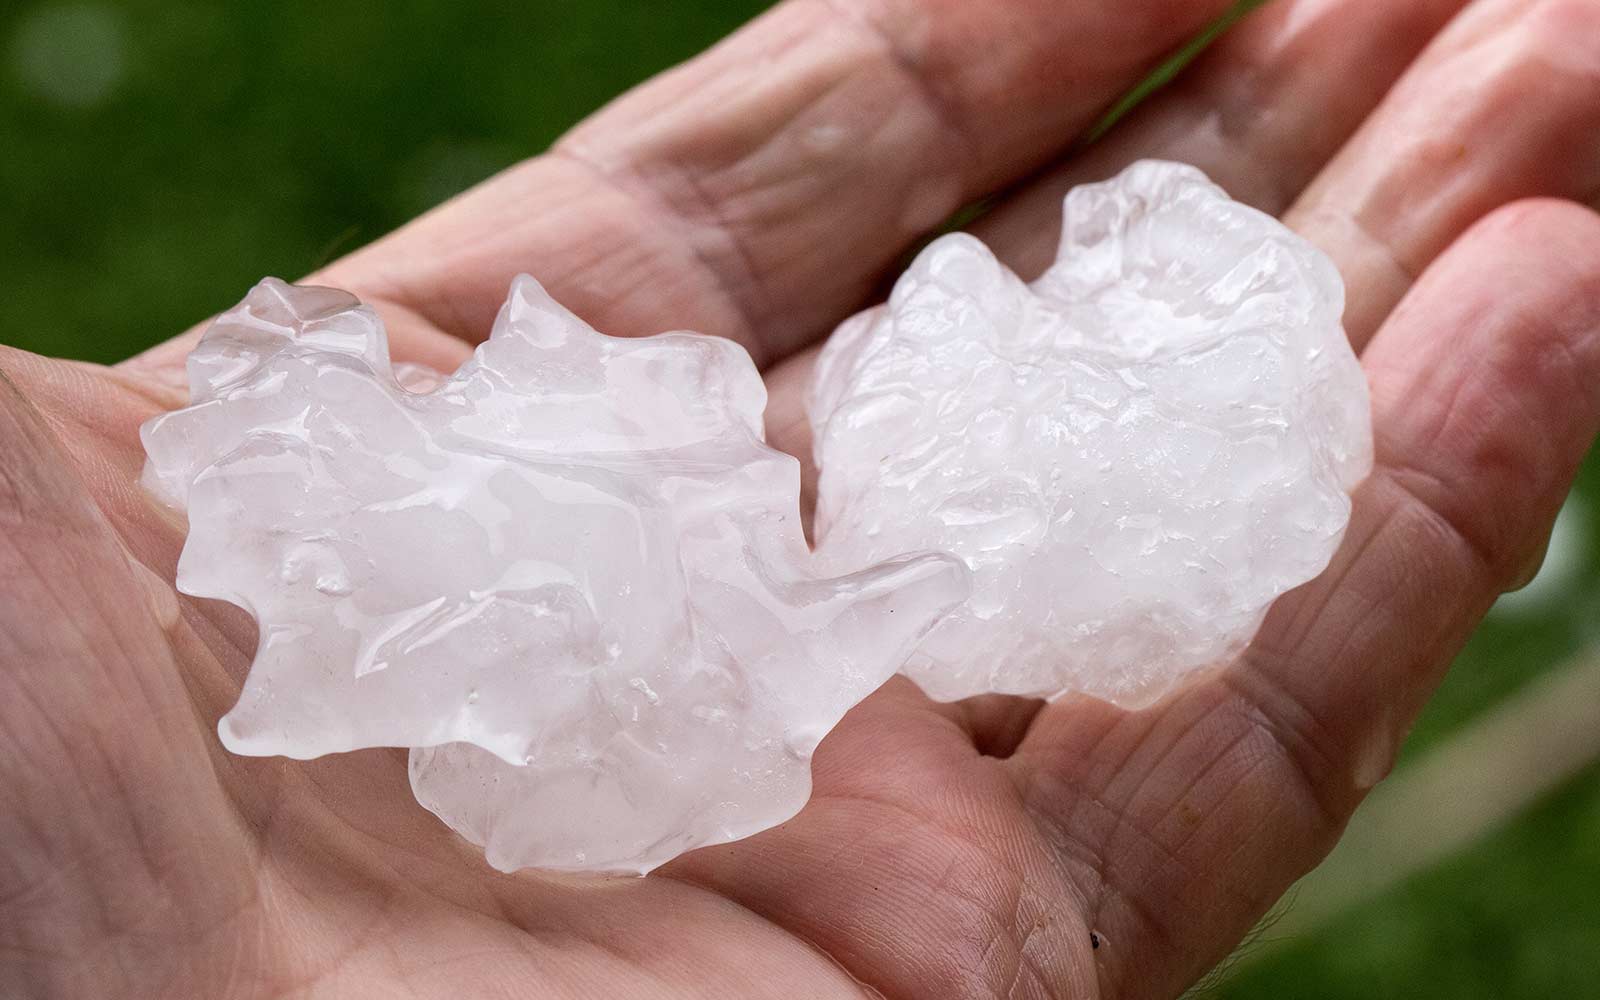 Hands holding large ice hail